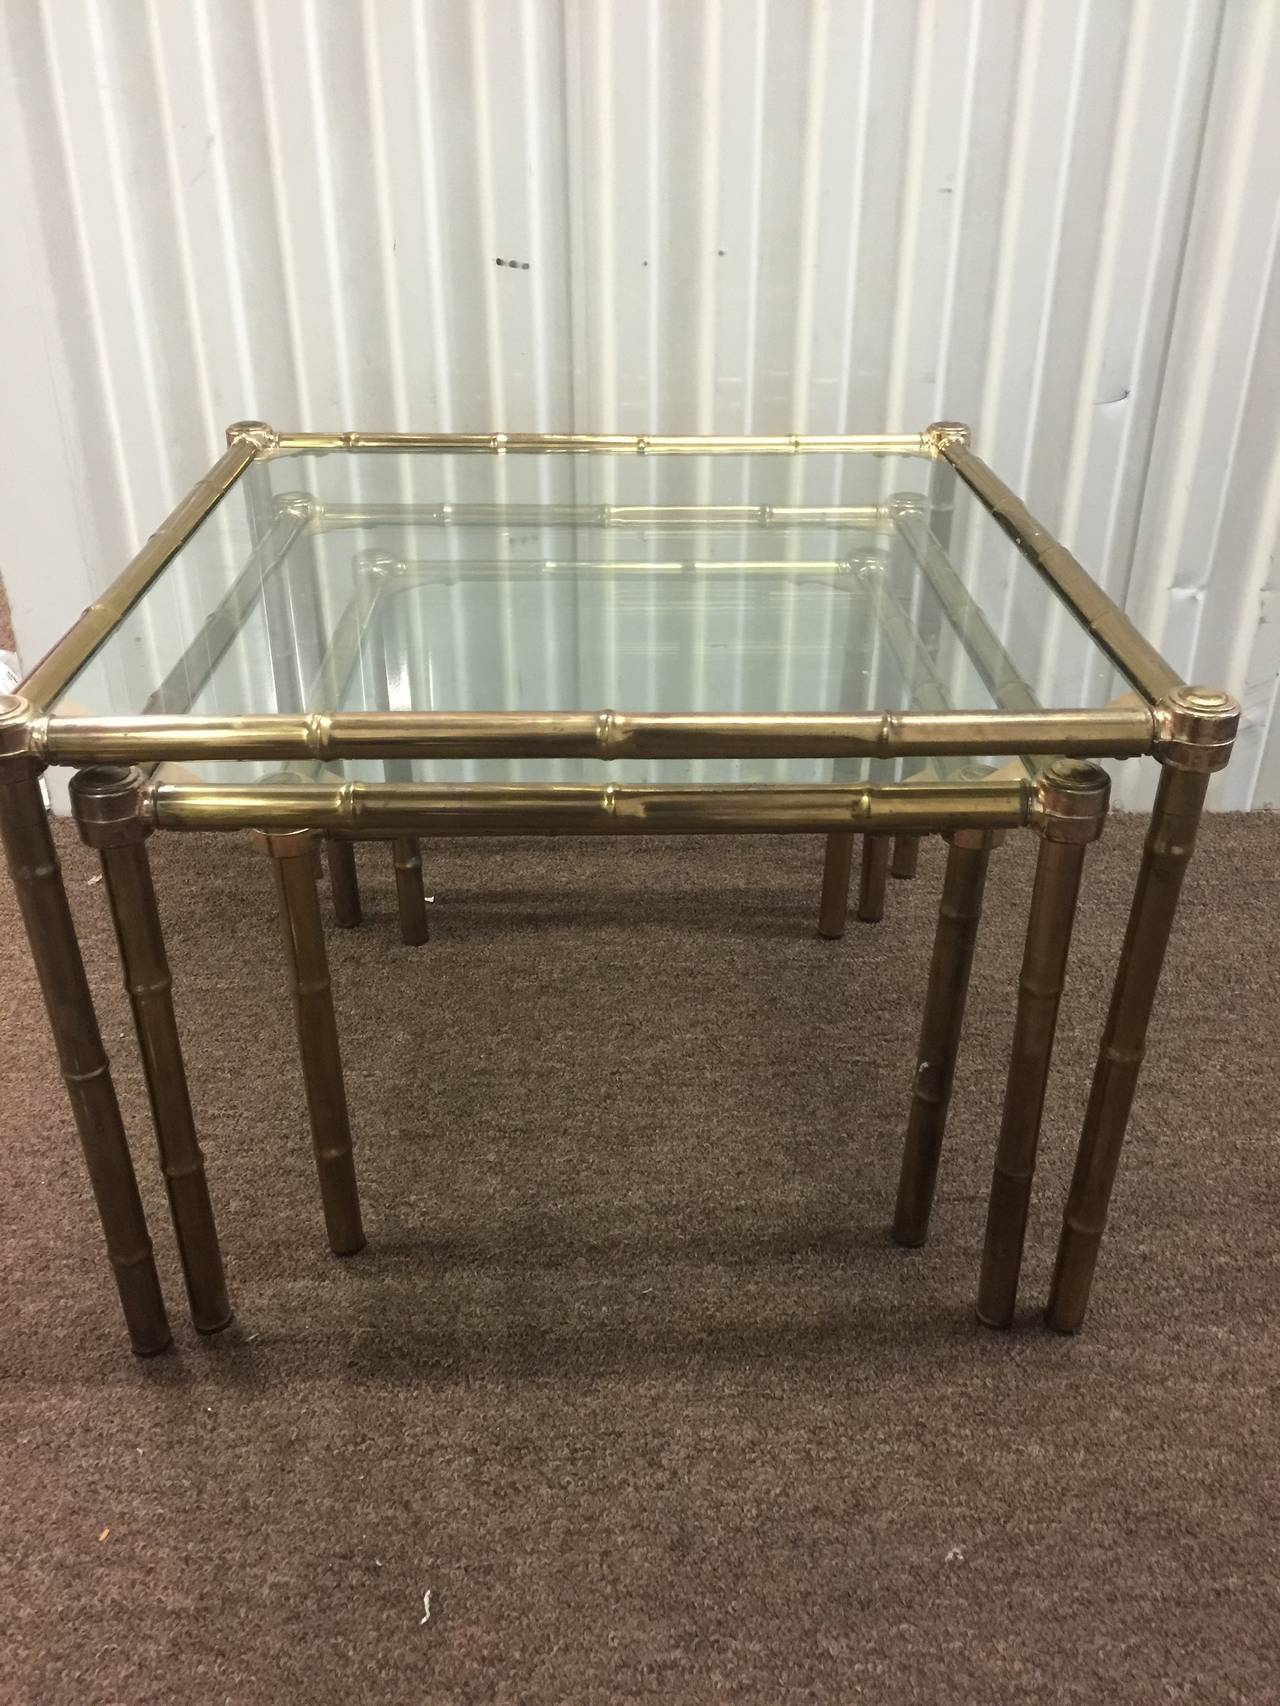 A vintage 1960s set of three unusually thick brass Italian nesting tables with glass tops. Good vintage condition with age appropriate patina.

Measures: Large table 16